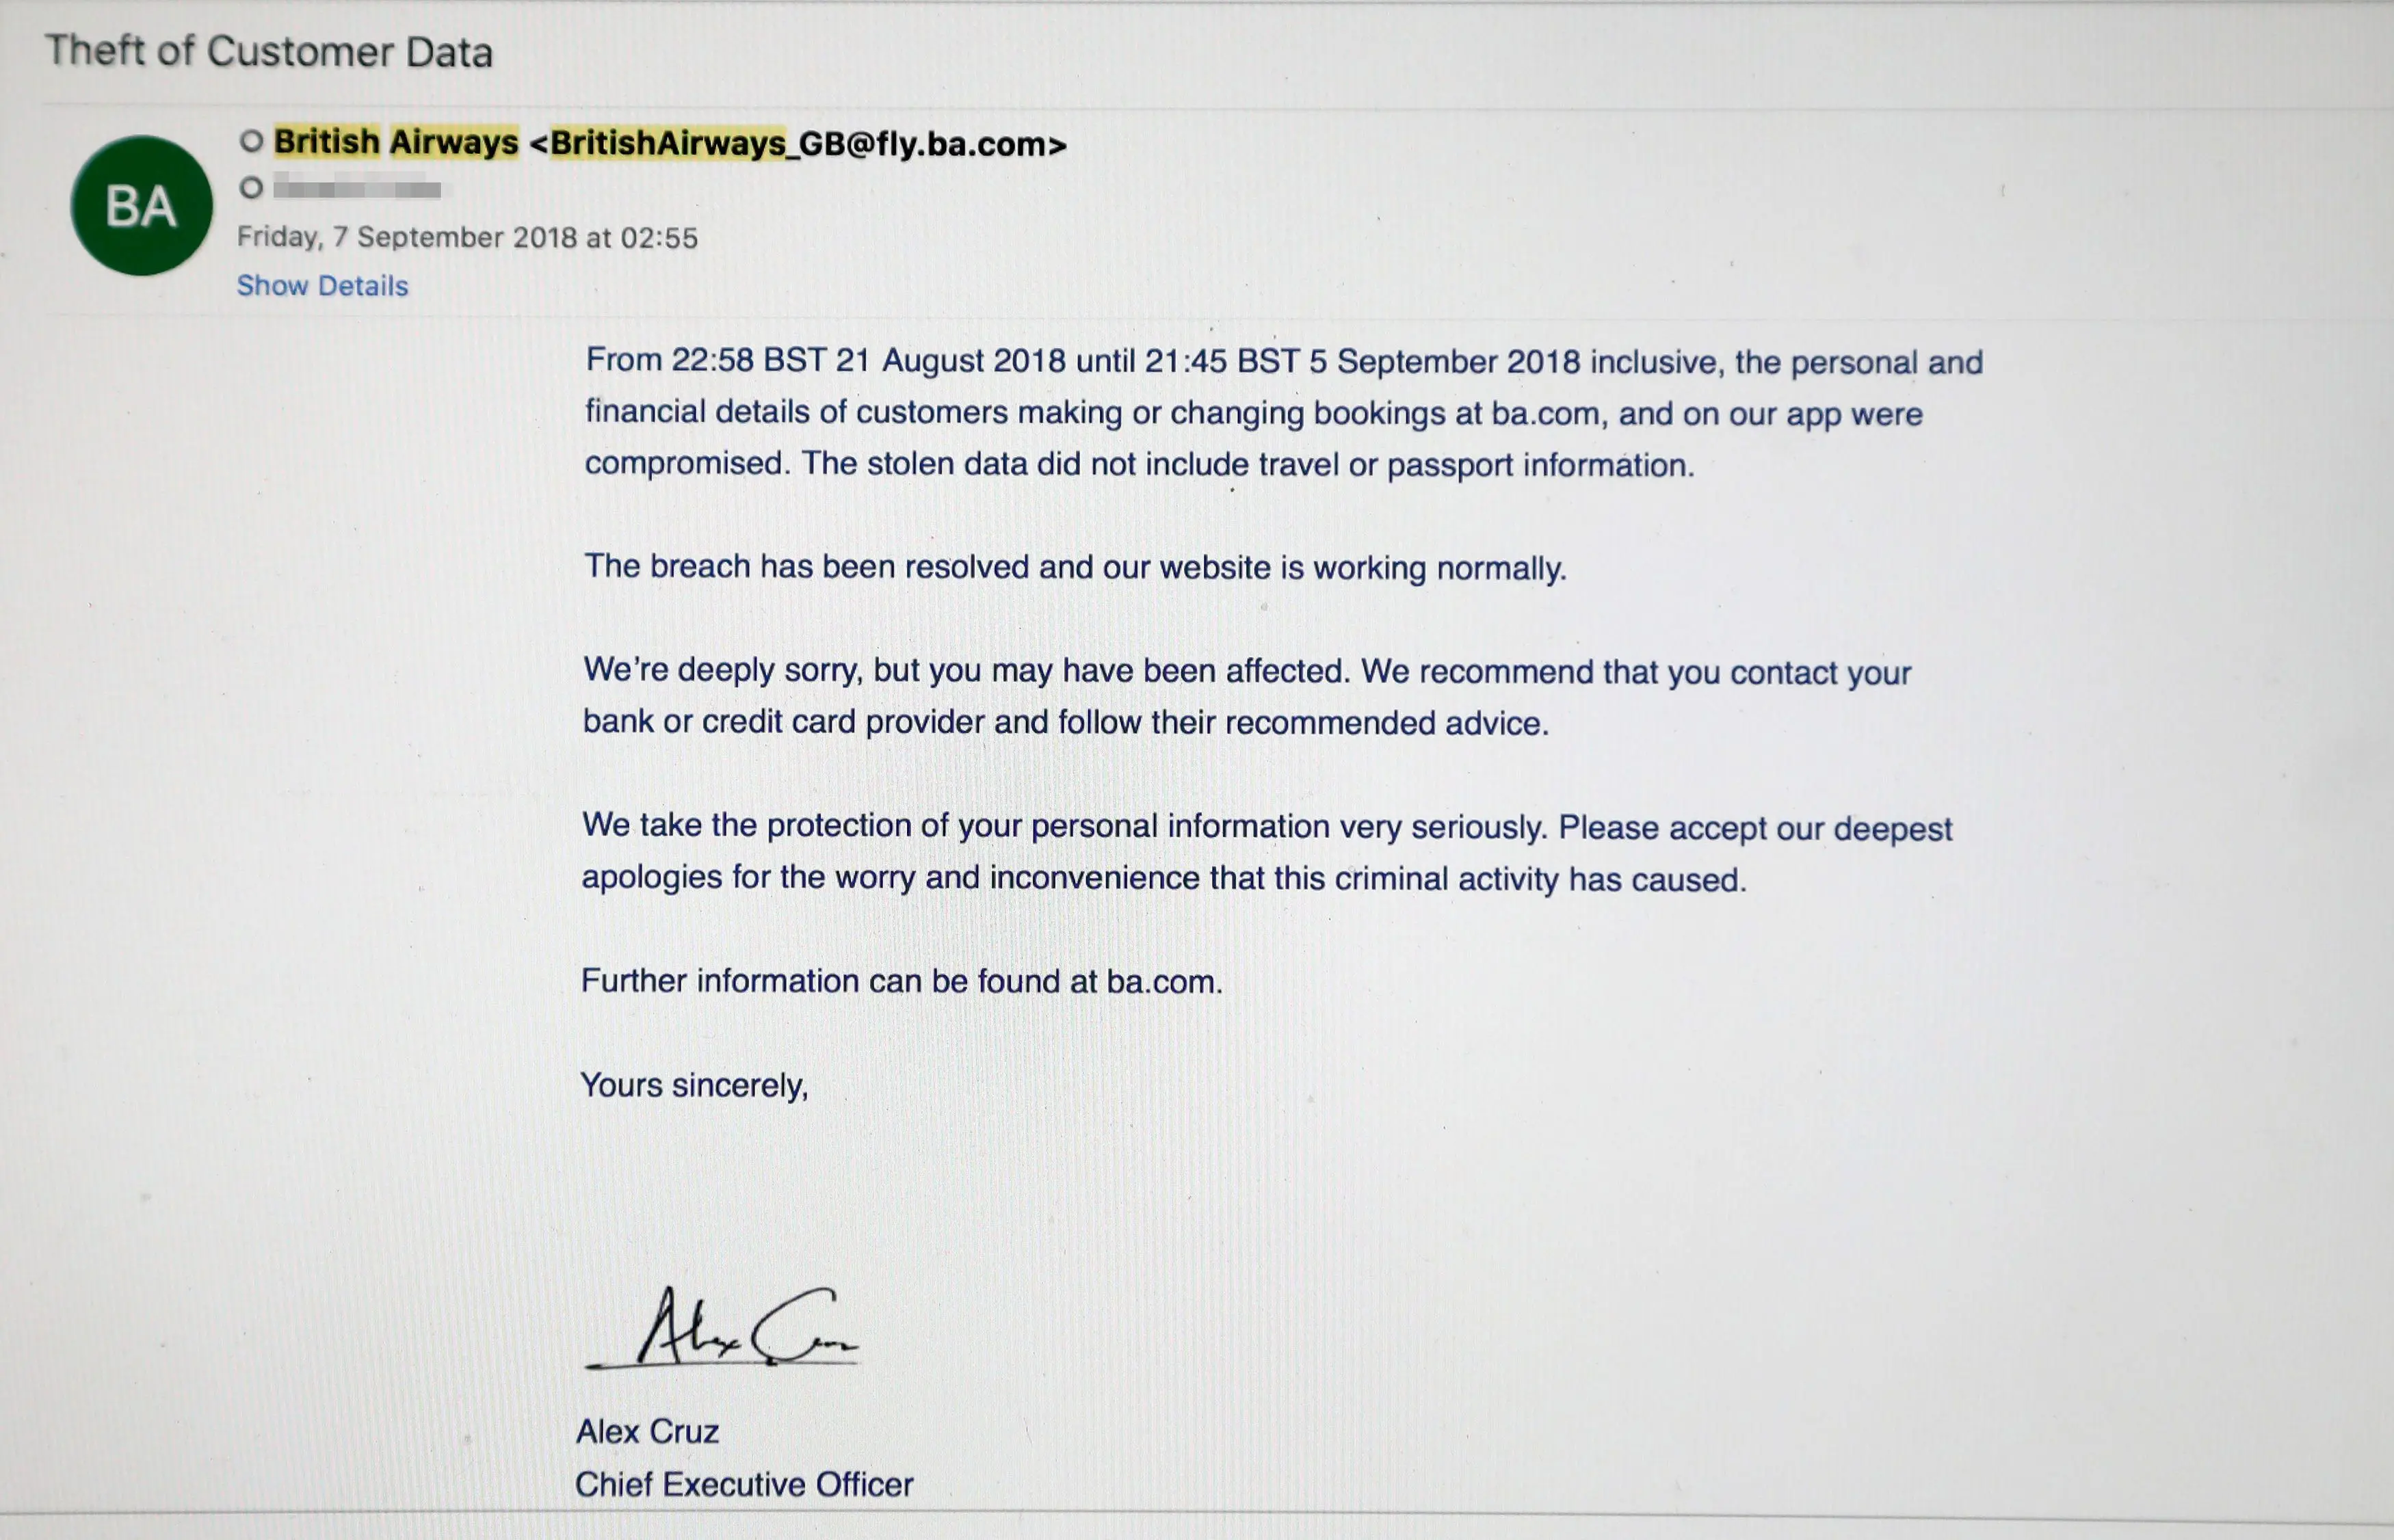 A screenshot of the email sent to notify British Airways customers of the leak